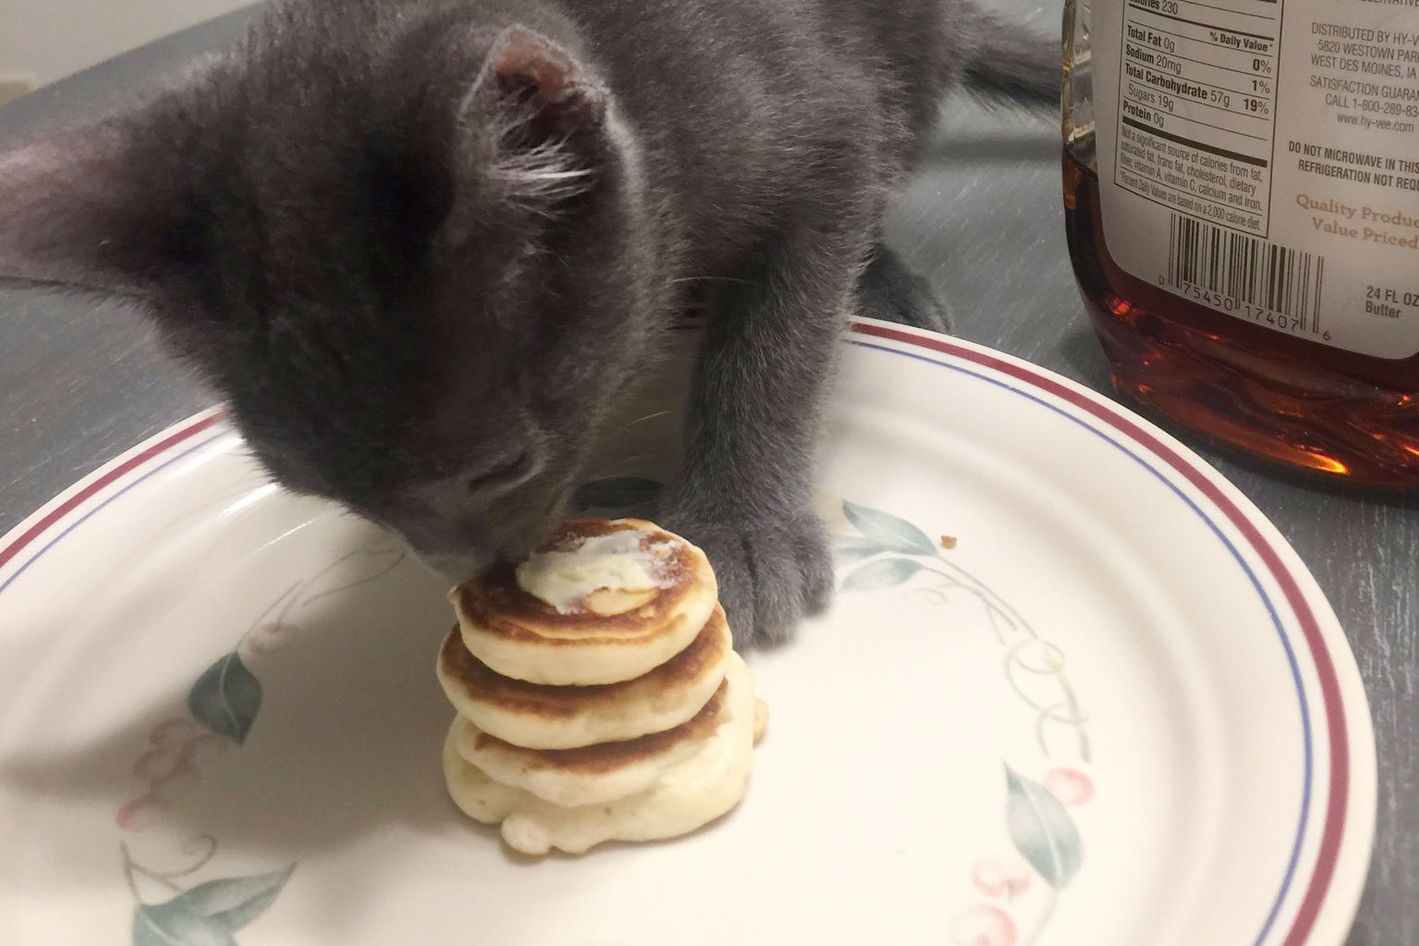 Can Cats Eat Pancakes? 